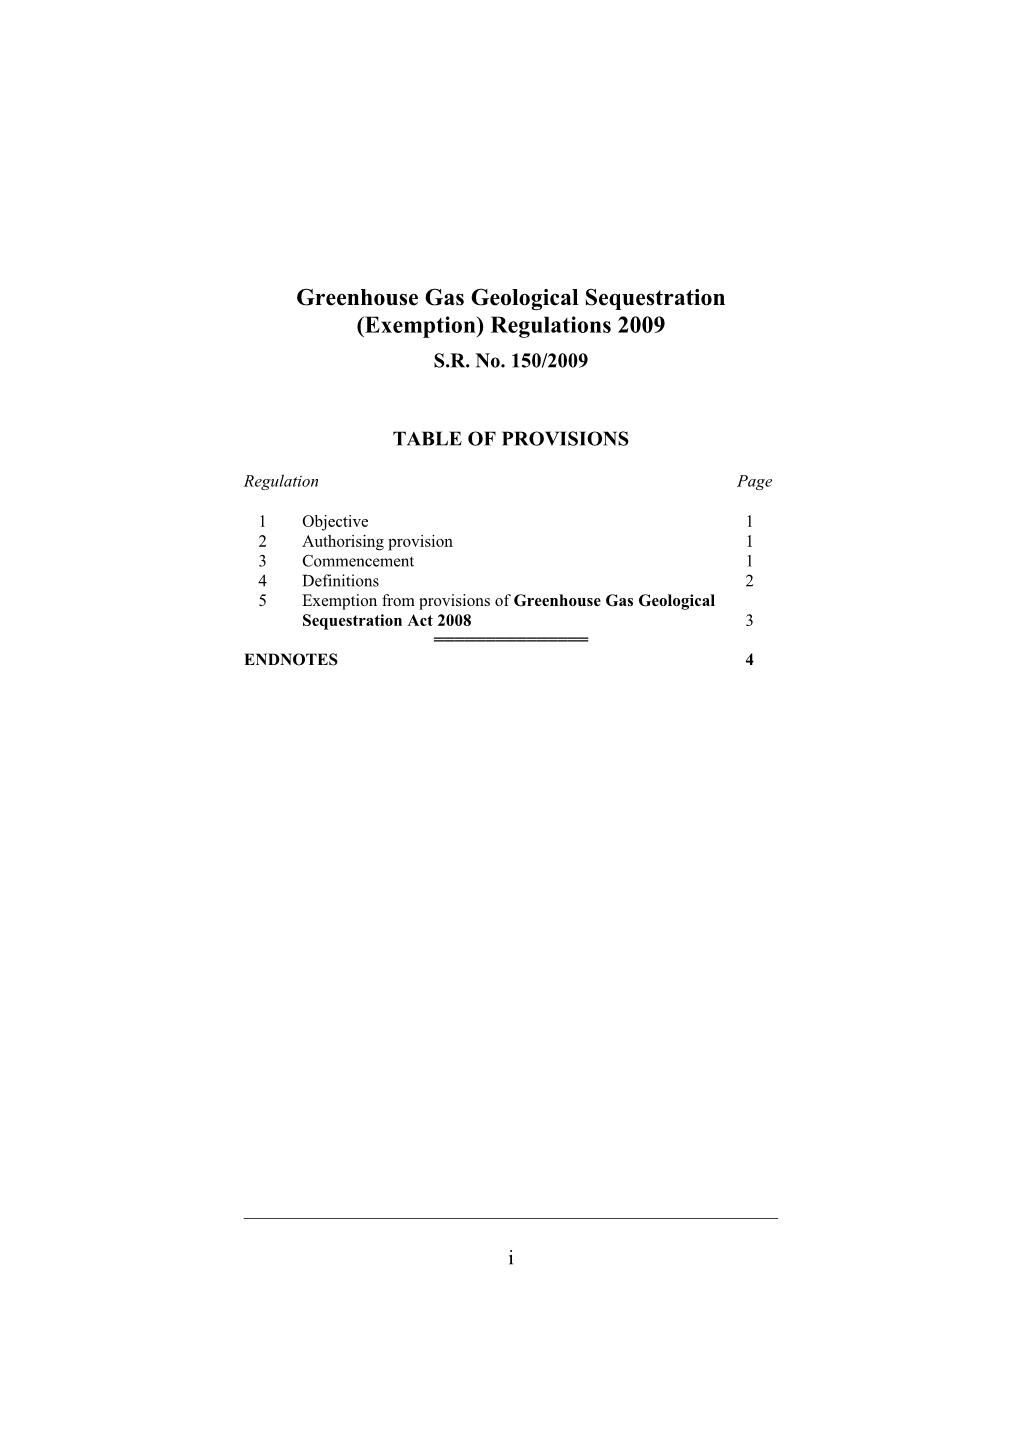 Greenhouse Gas Geological Sequestration (Exemption) Regulations 2009